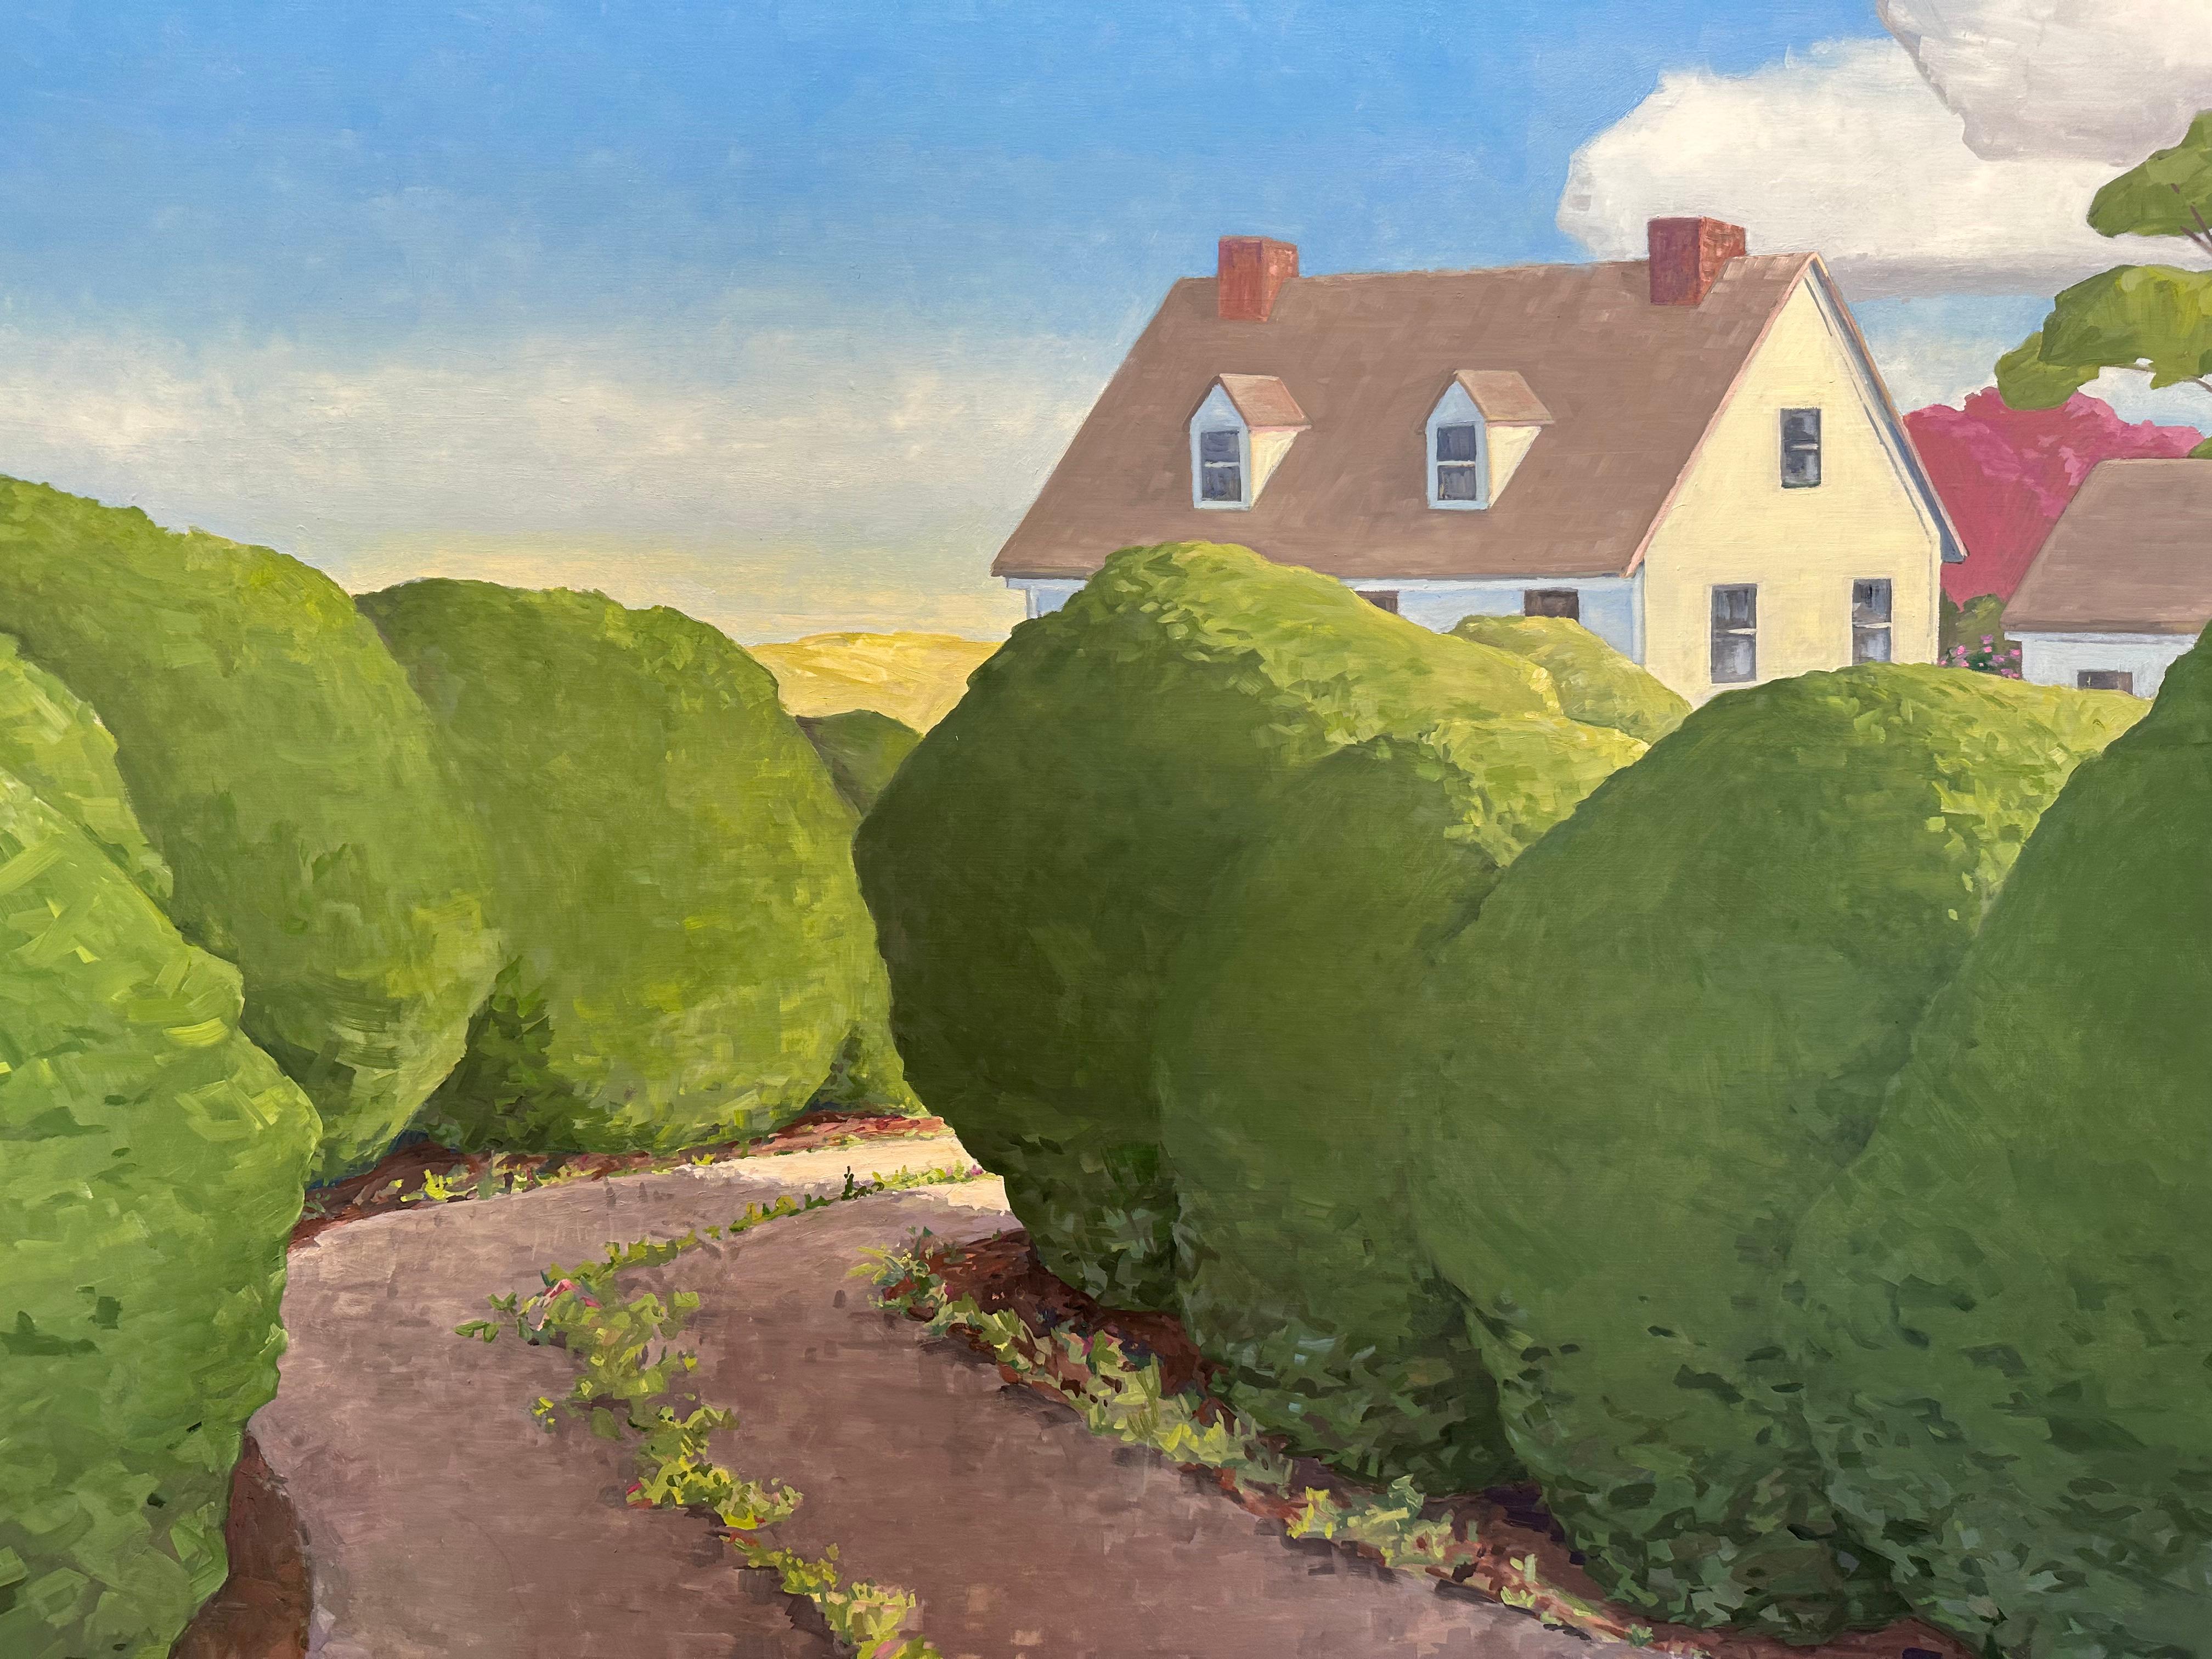 A peaceful painting of the chimneys and roof of a white house visible down a winding path lined with tall green hedges. The serene sky is calm and blue with a couple cumulus clouds floating overhead. Signed, dated and titled on verso.

KK Kozik is a